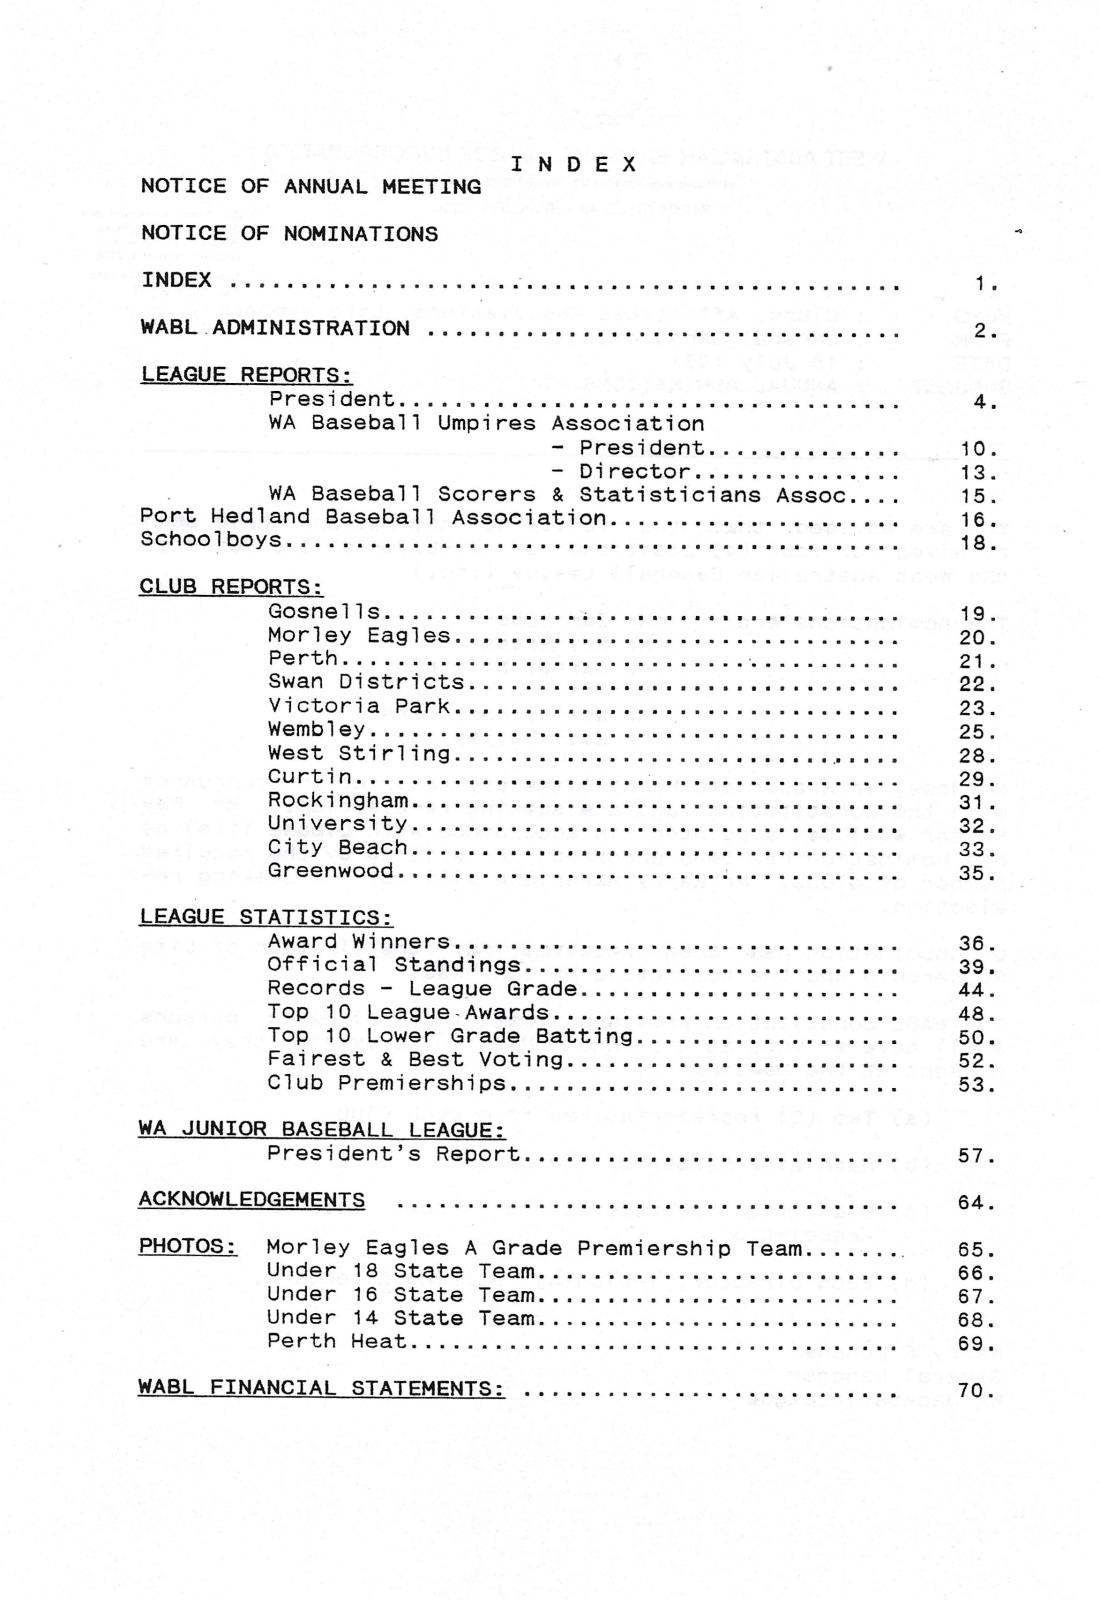 West Australian Baseball League 56th Annual Report 1990-91 index page